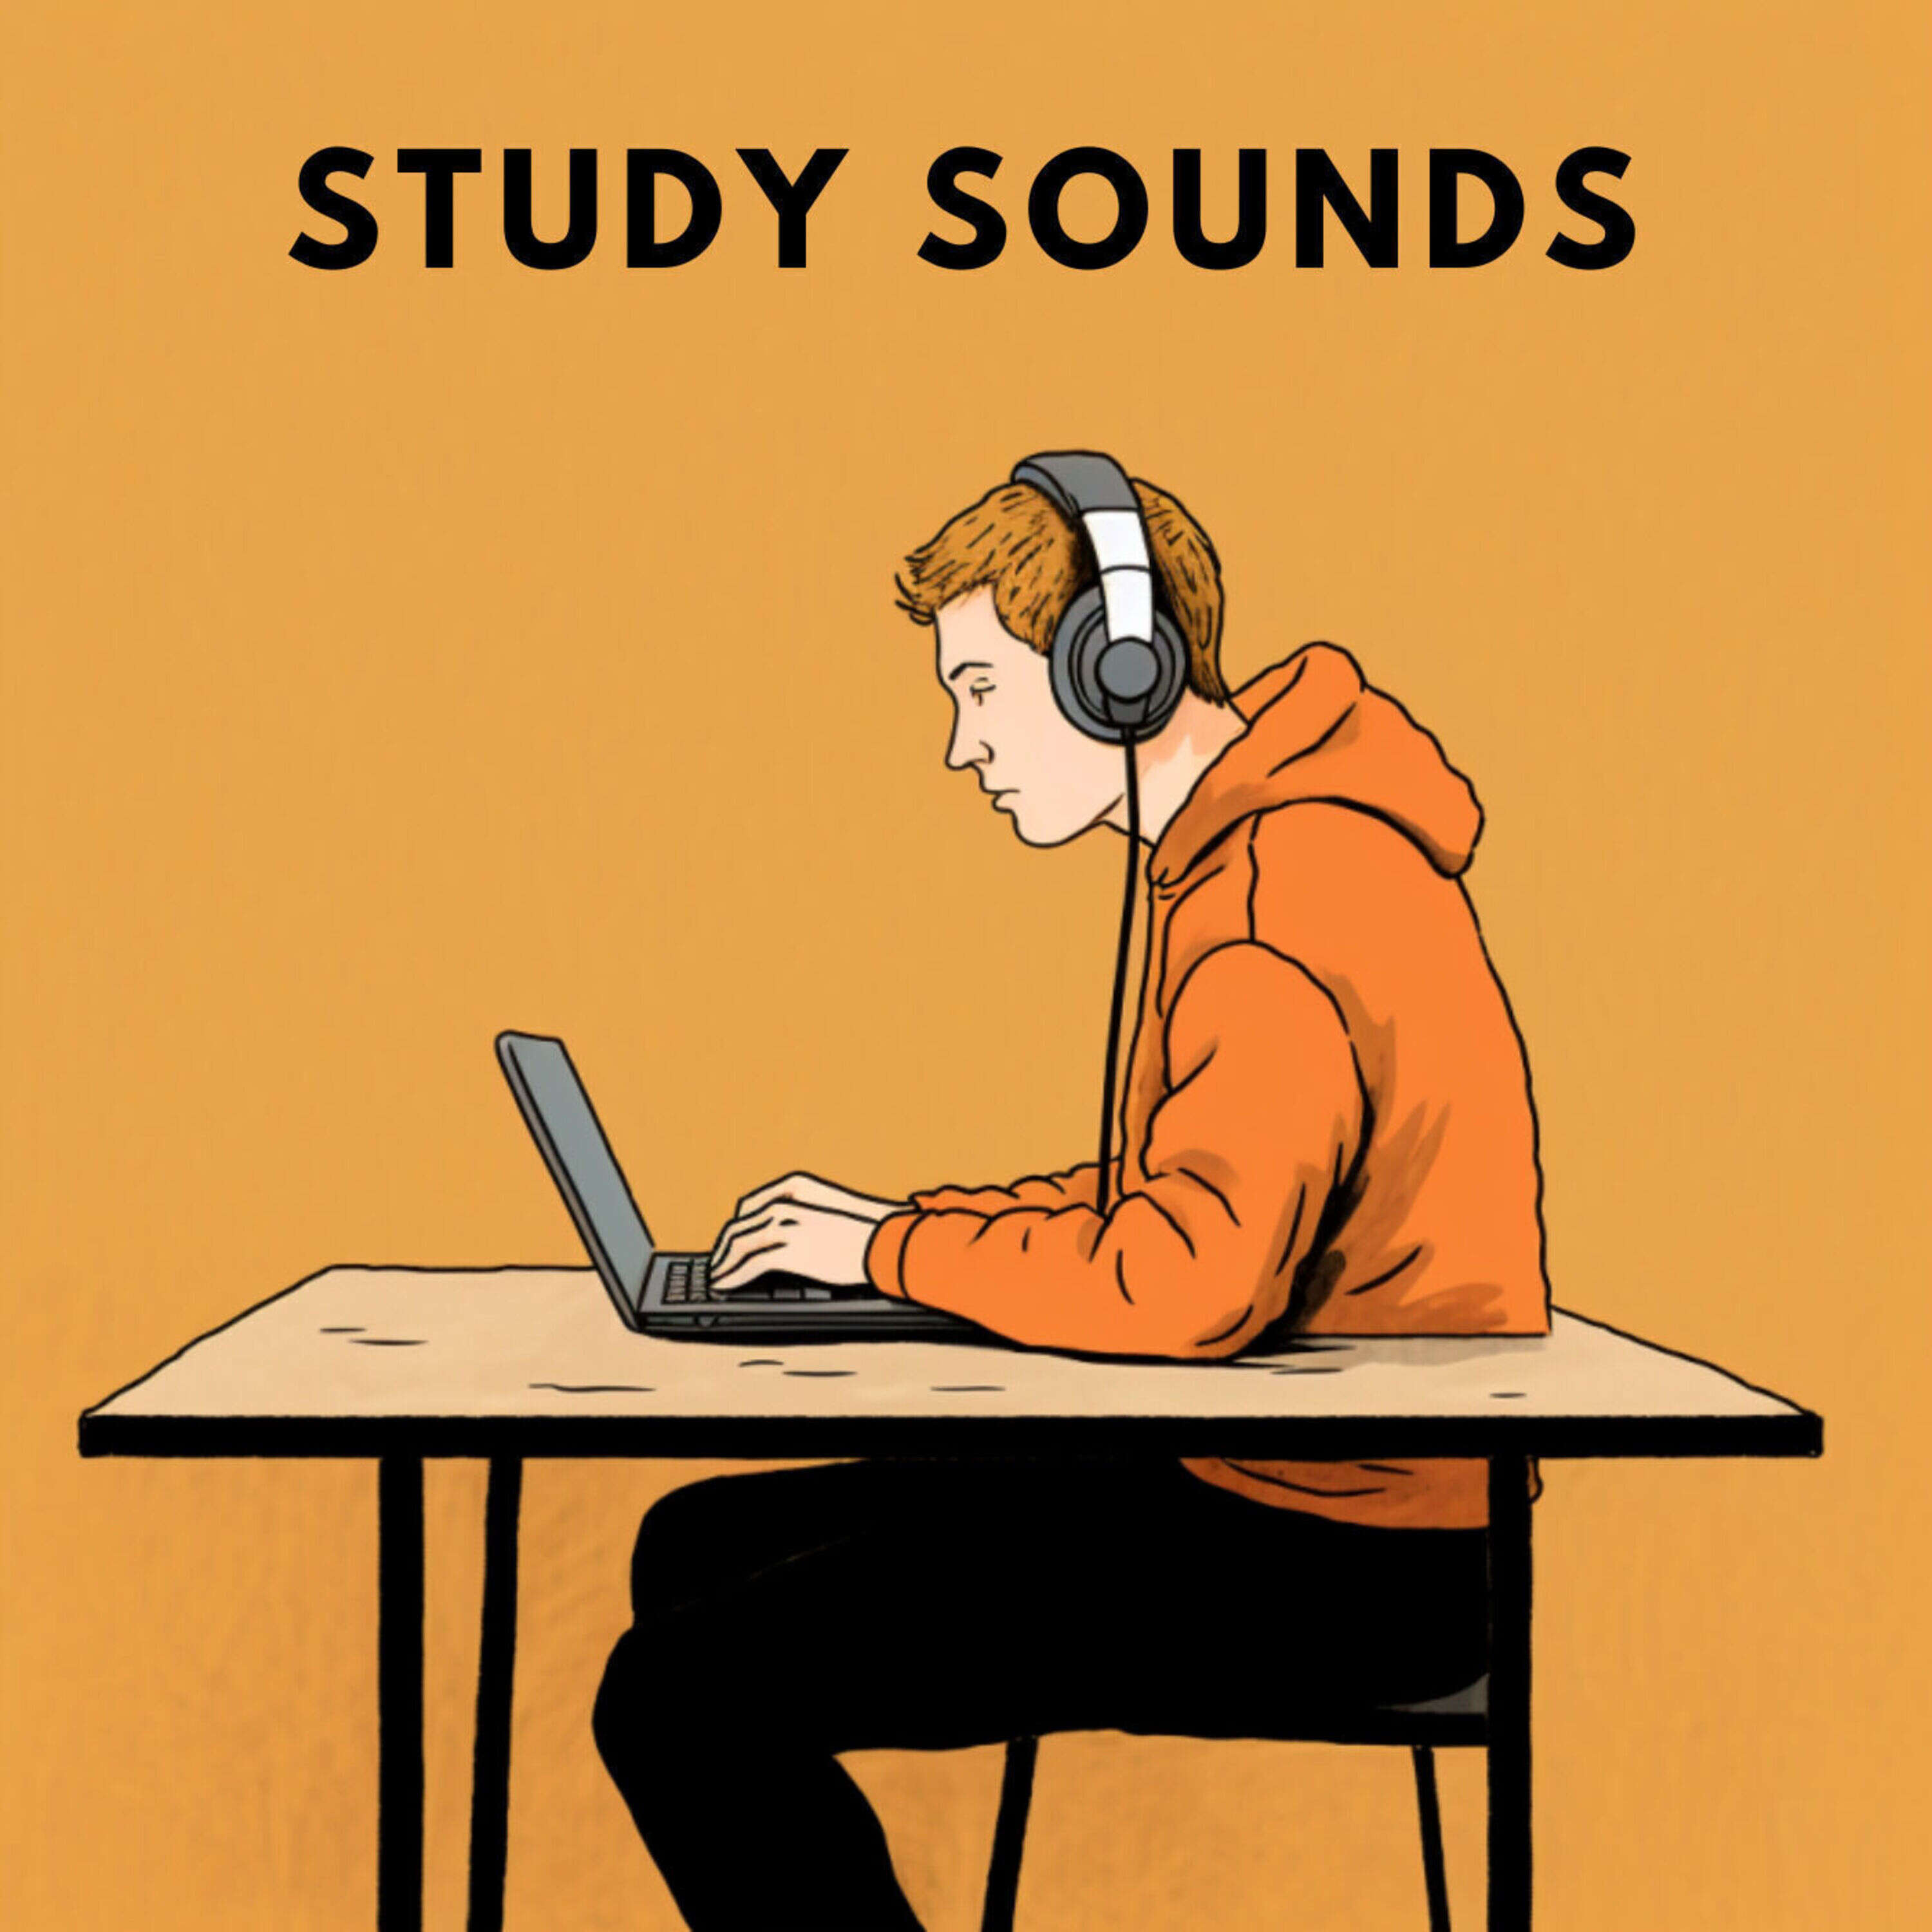 Deep Focus sounds For Studying - Enhance Your Focus With of Ambient Study sounds